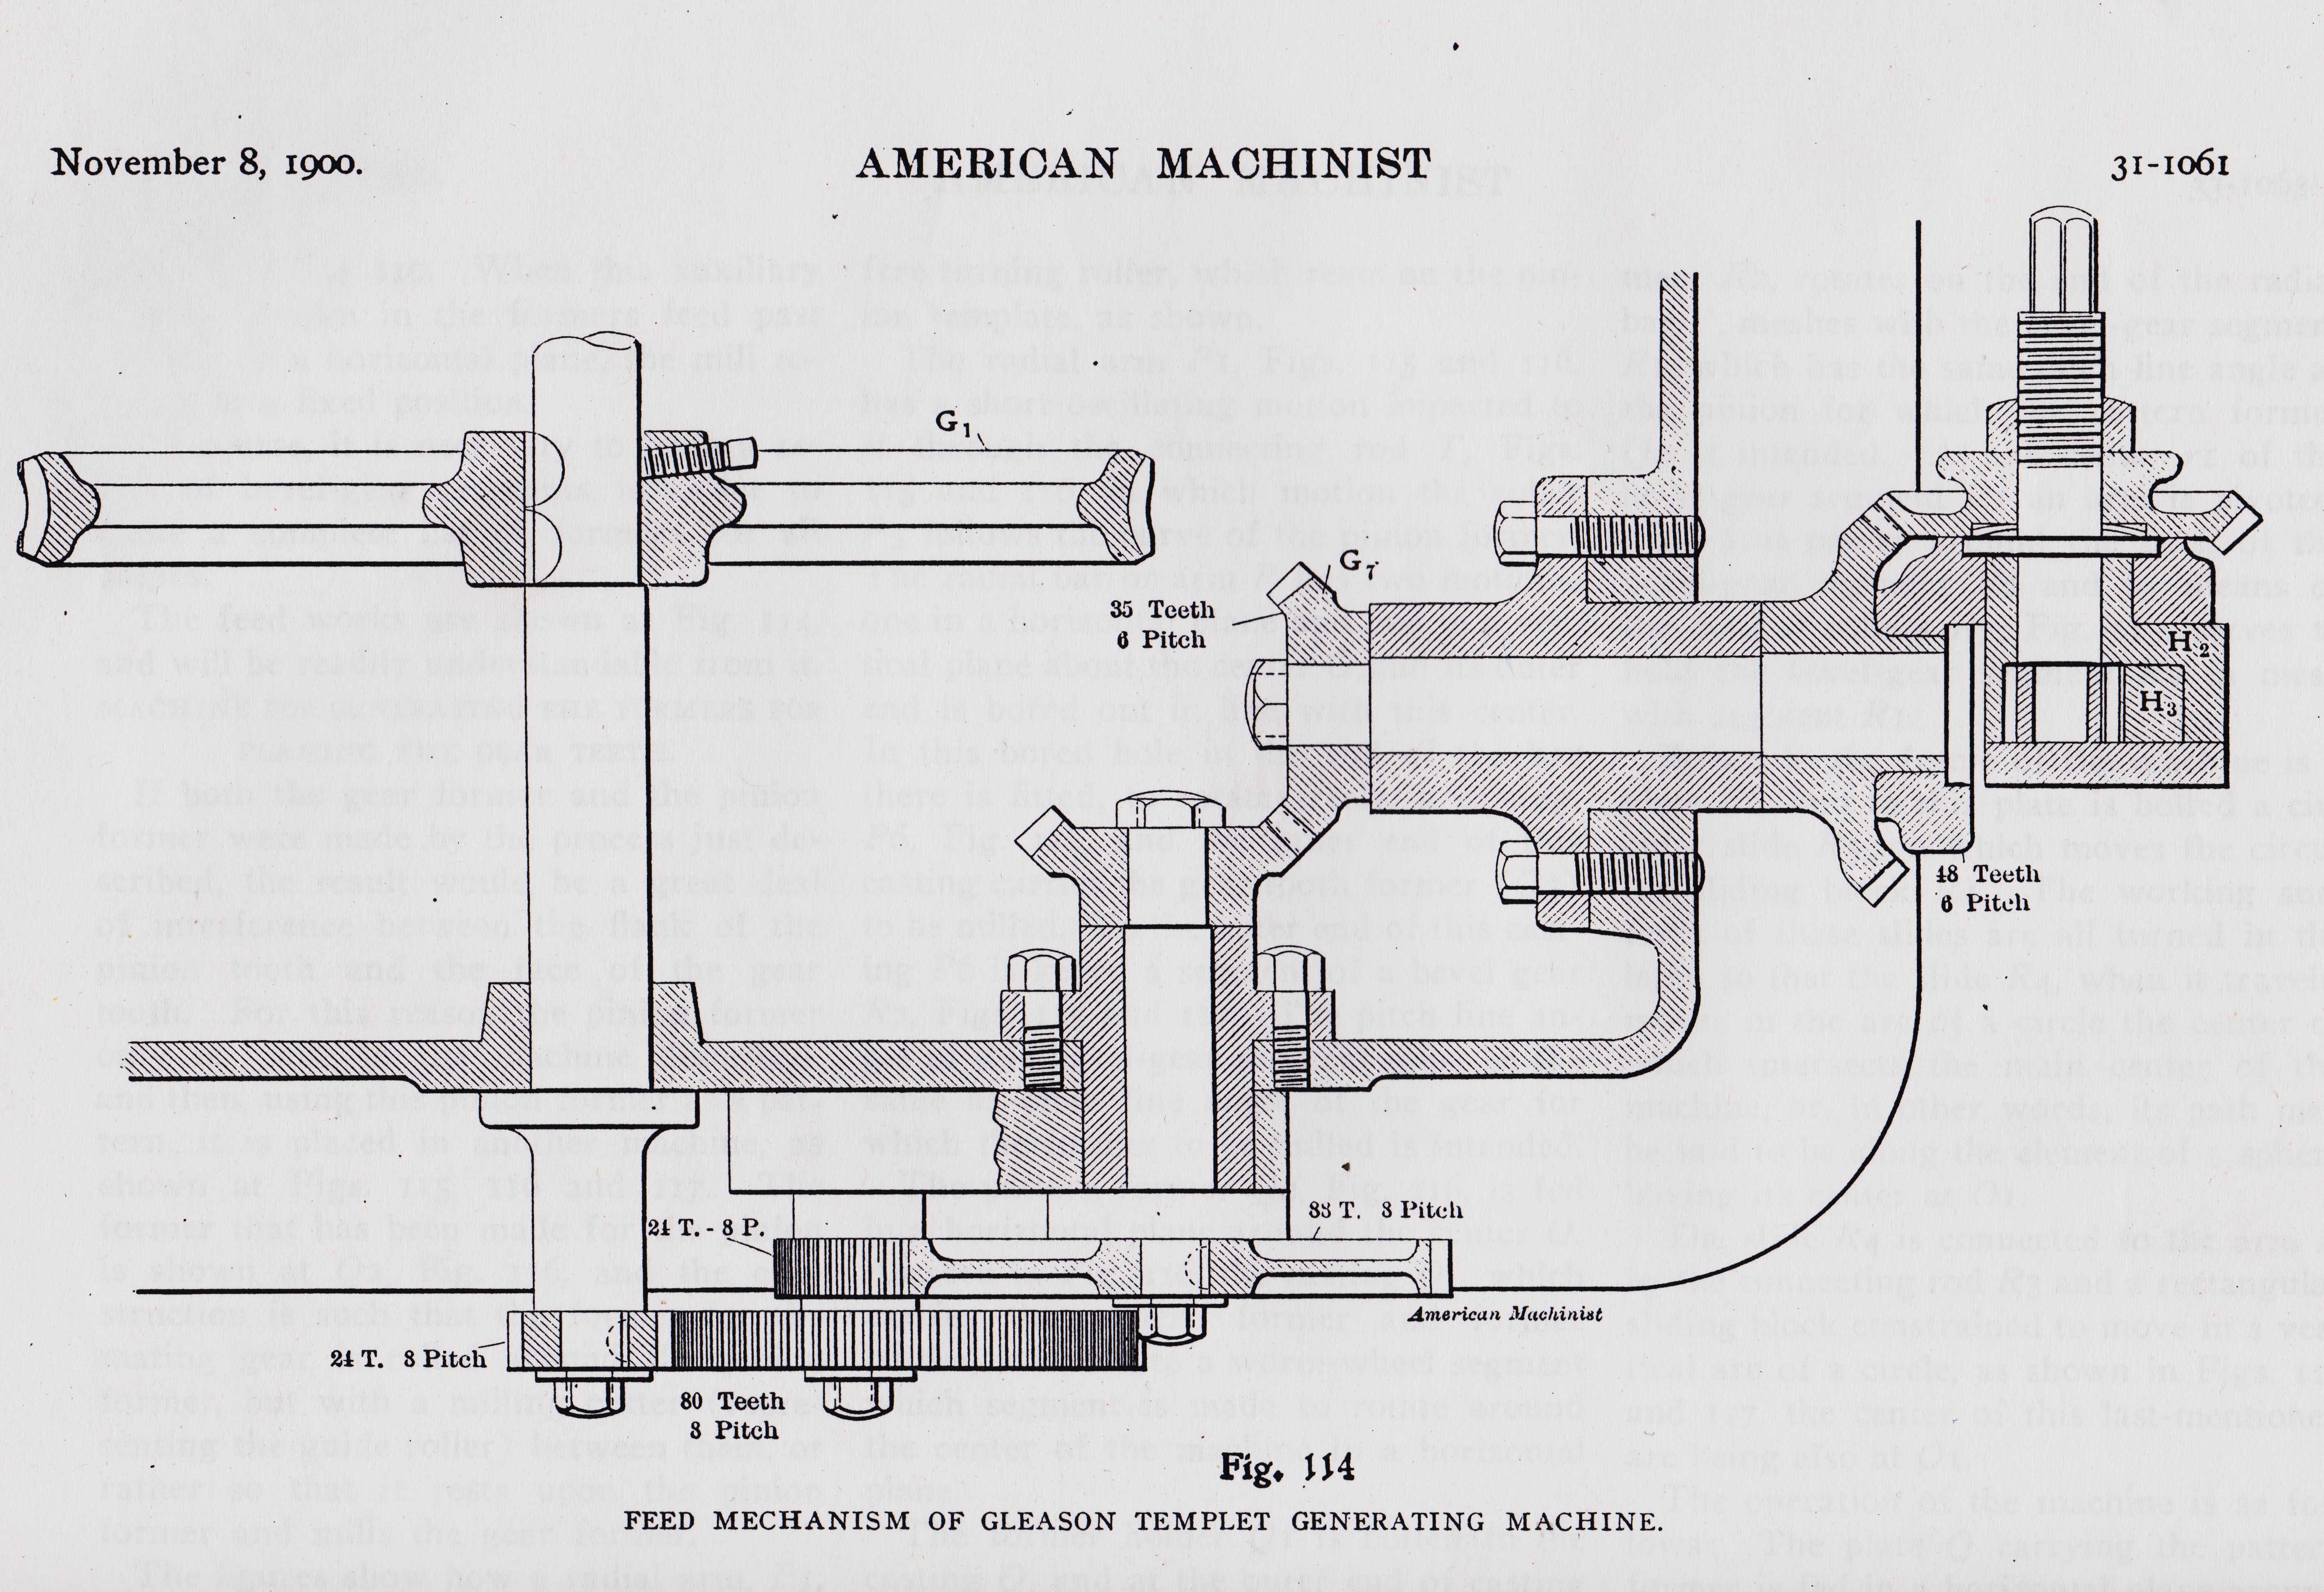 https://antiquemachinery.com/images-American-Machinist-Nov-8-1900-bot-The-Gleason-Bevel-Gear-Toot-Planer/American-Machinist-Nov-8-1900-pg-31-1061-top-Line-drawing-of-the-machine-internal-gears-work-are-cut-how-the-machine-works-Feed-Mechanism-Gleason-Templet-Bevel-Pinion-Tooth-Generating-Machine.jpeg